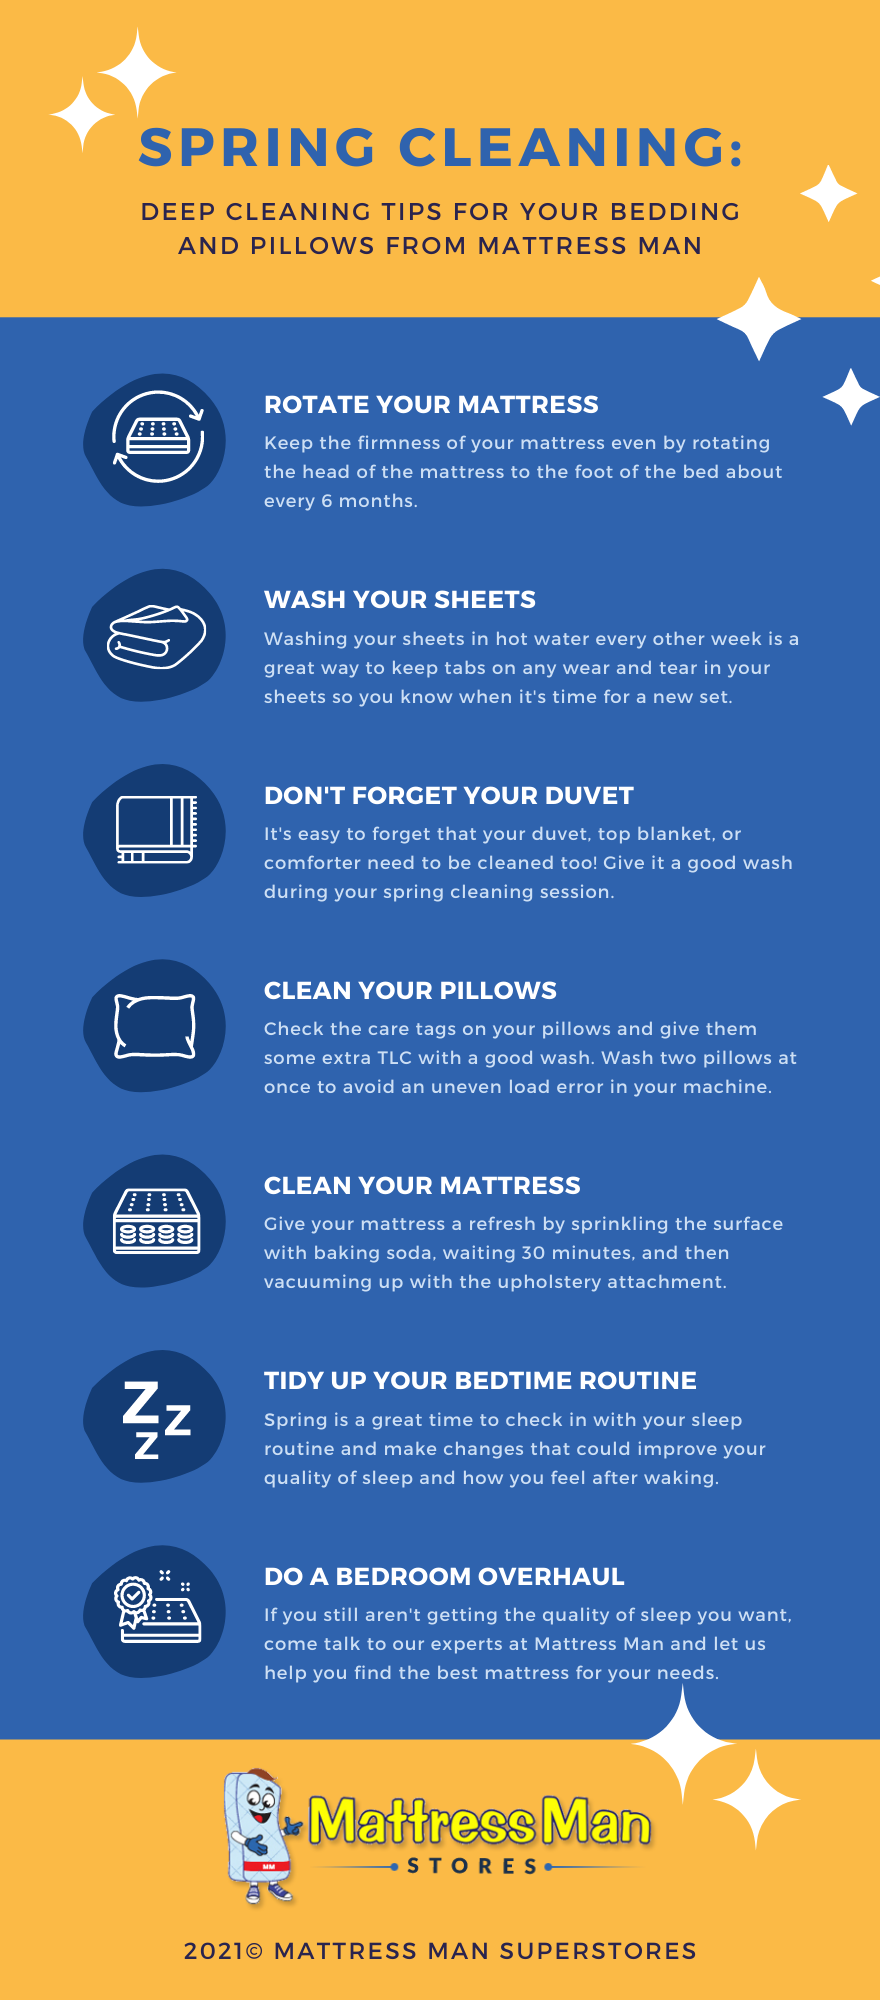 Deep cleaning tips for your bedding and pillows from Mattress Man